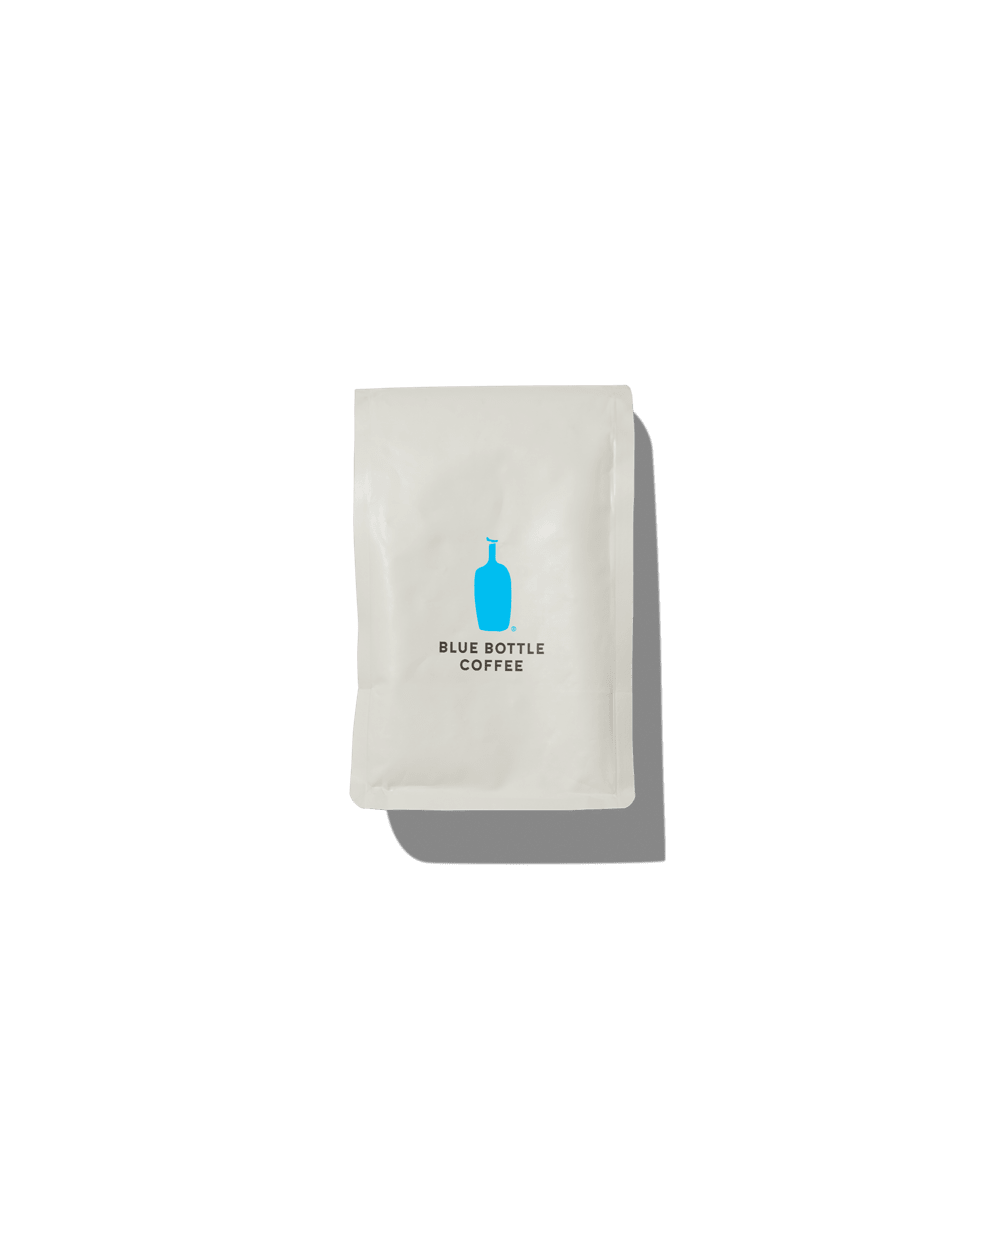 Image of coffee bag with Blue Bottle Coffee logo